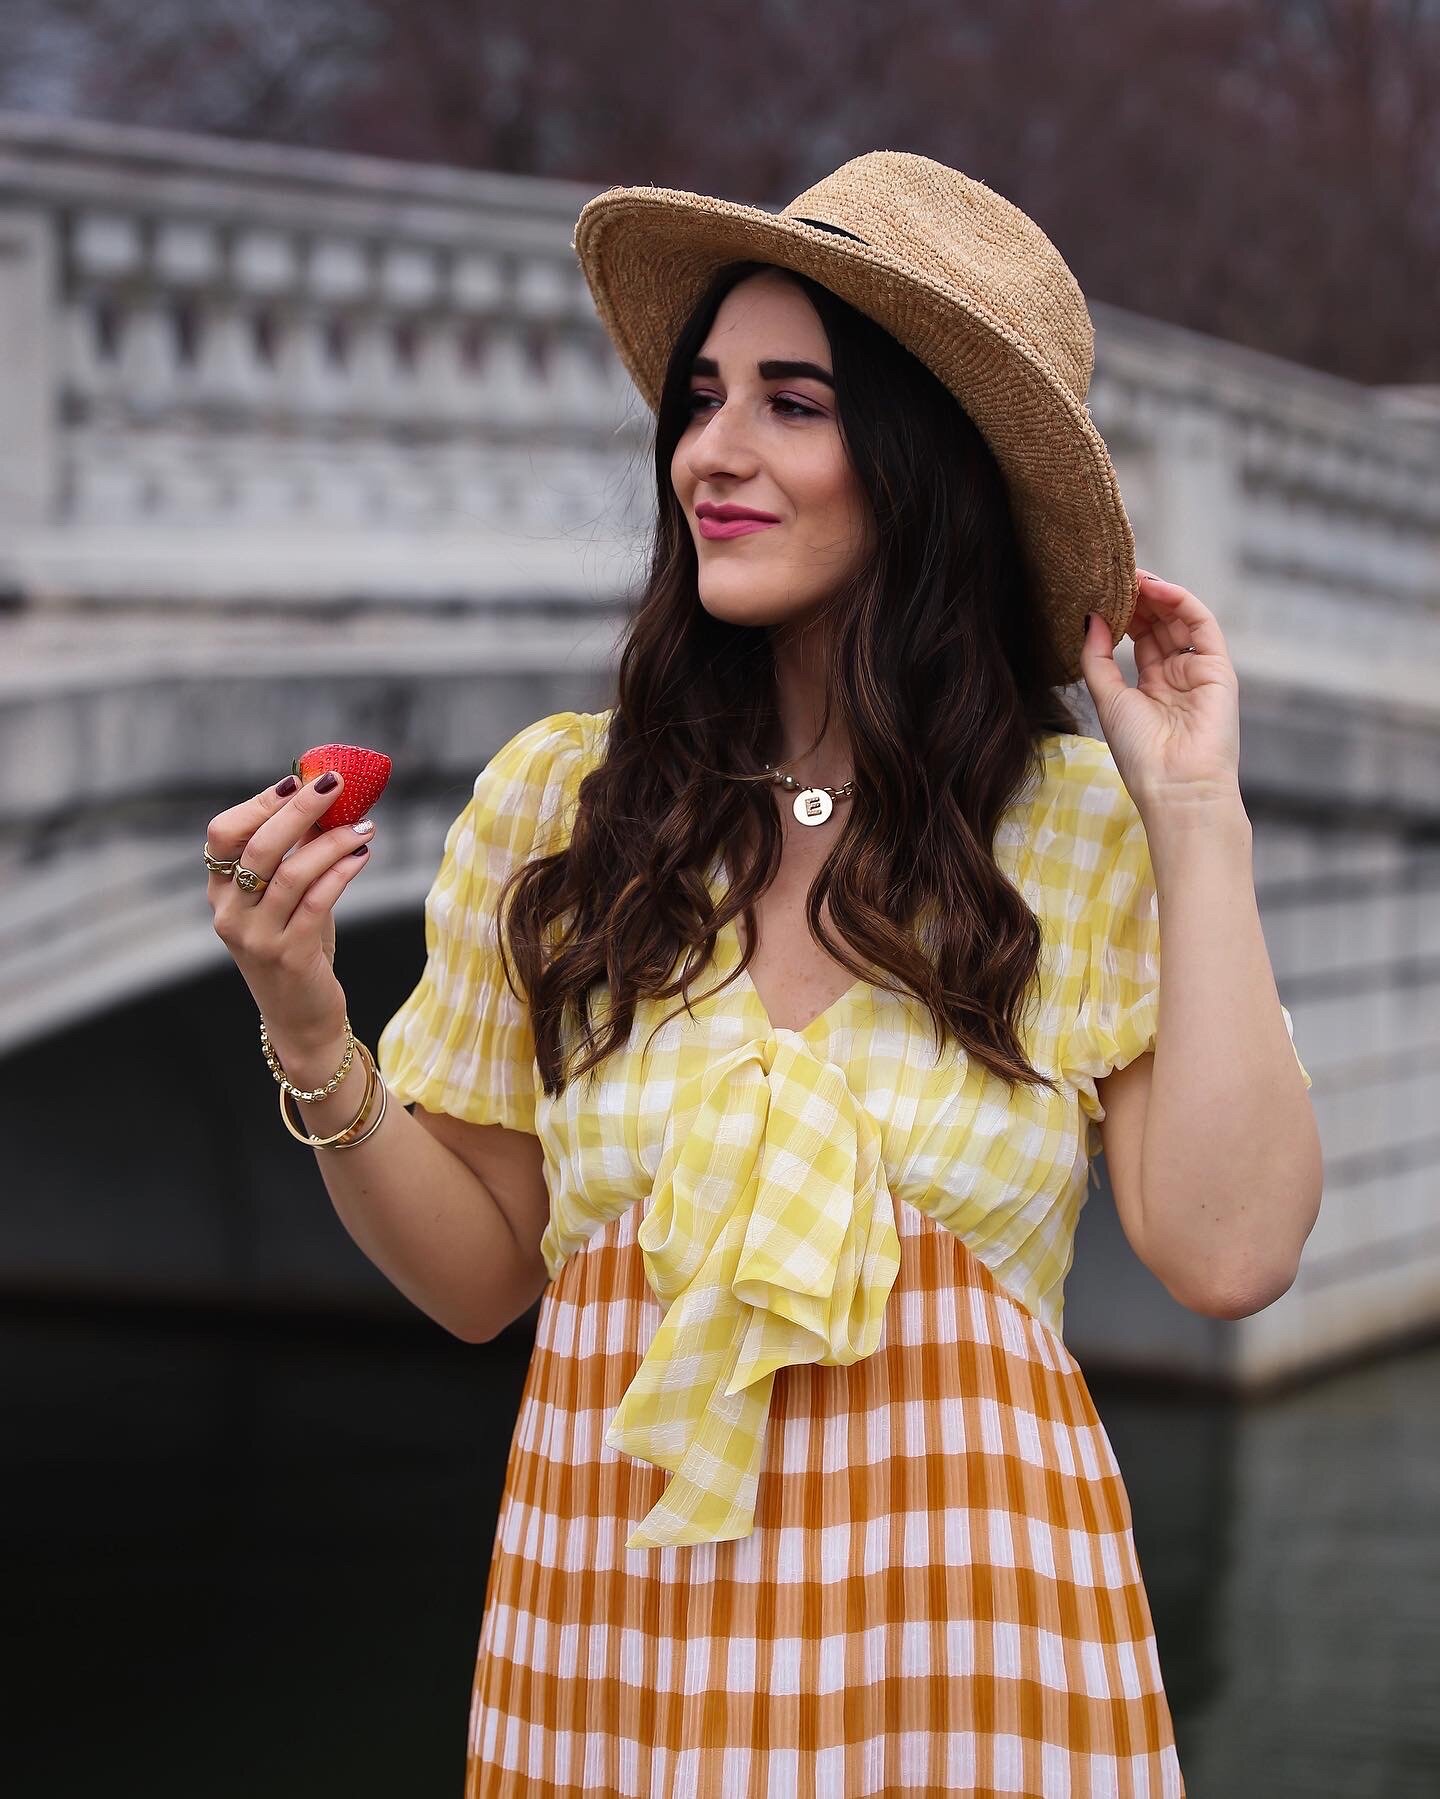 Gingham Midi Dress Summer Picnic Esther Santer NYC Street Style Fashion Blogger Fedora Checkered Maxi Orange Yellow Colorful Spring Stawberries Photoshoot St Louis Missouri Foxiedox Noa Initital Necklace Gold Bracelets Rings Jewelry Forest Park Hat.JPG